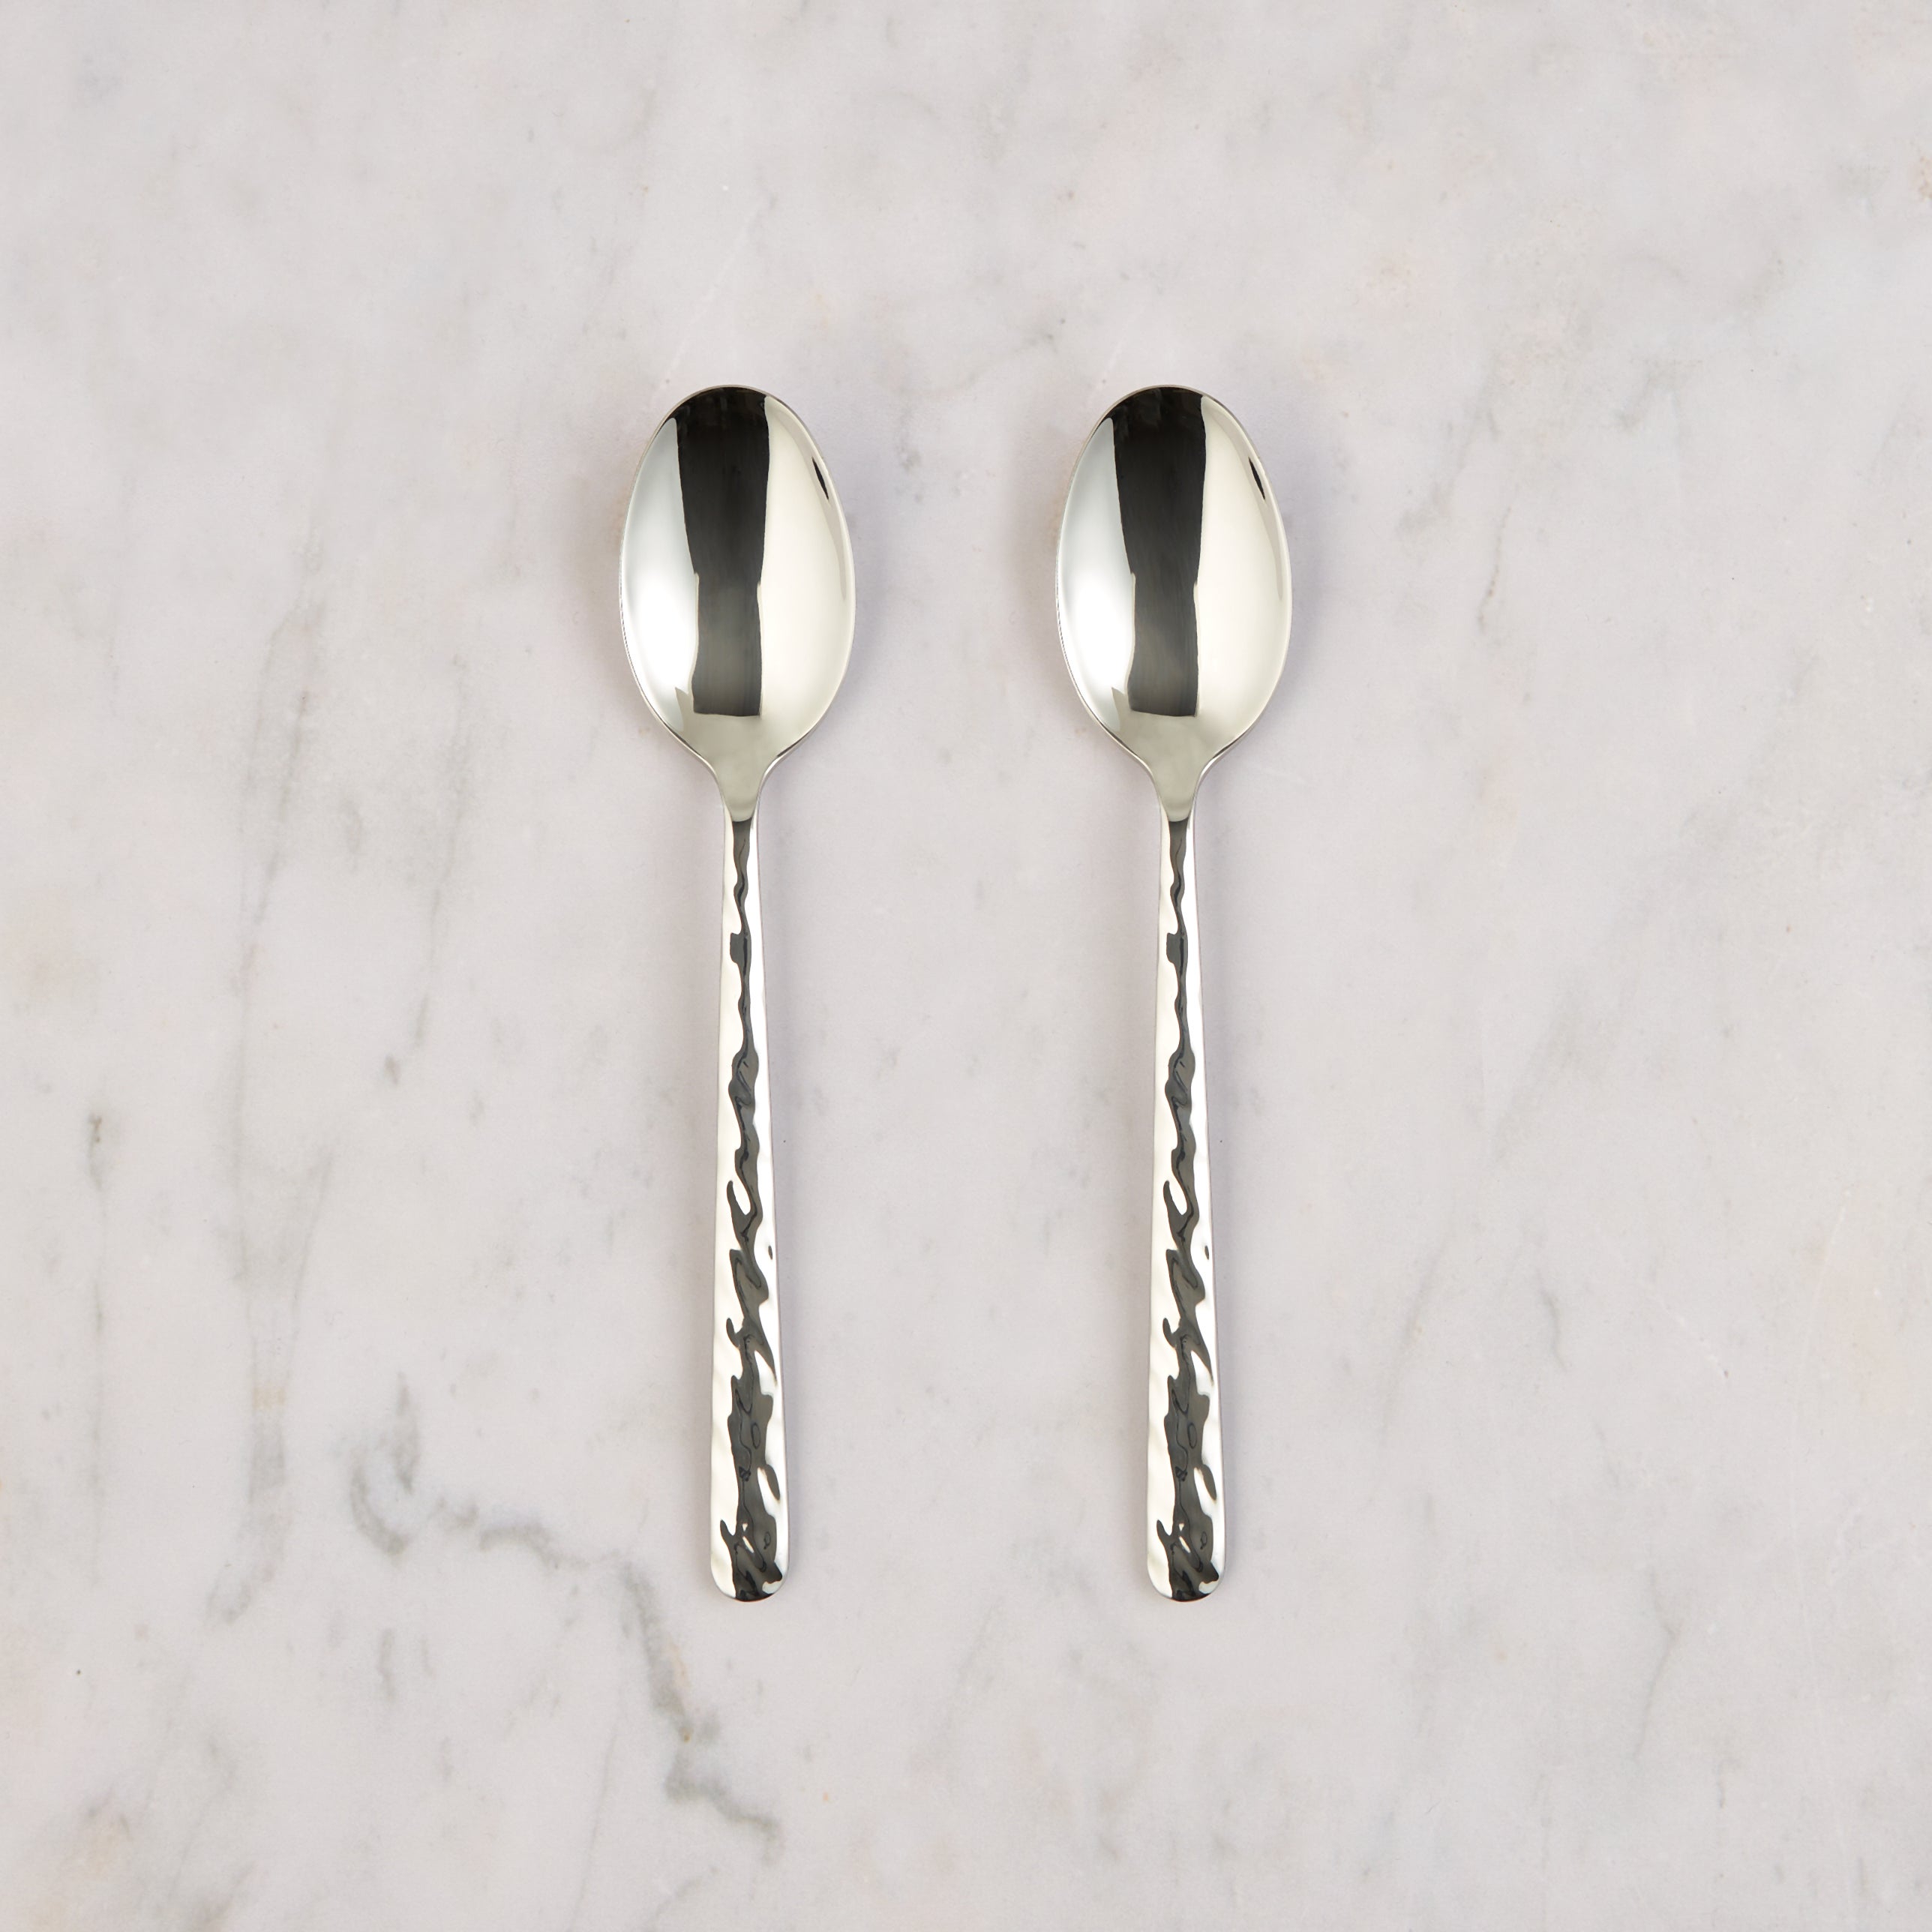 Chesterton Set of 2 Serving Spoons